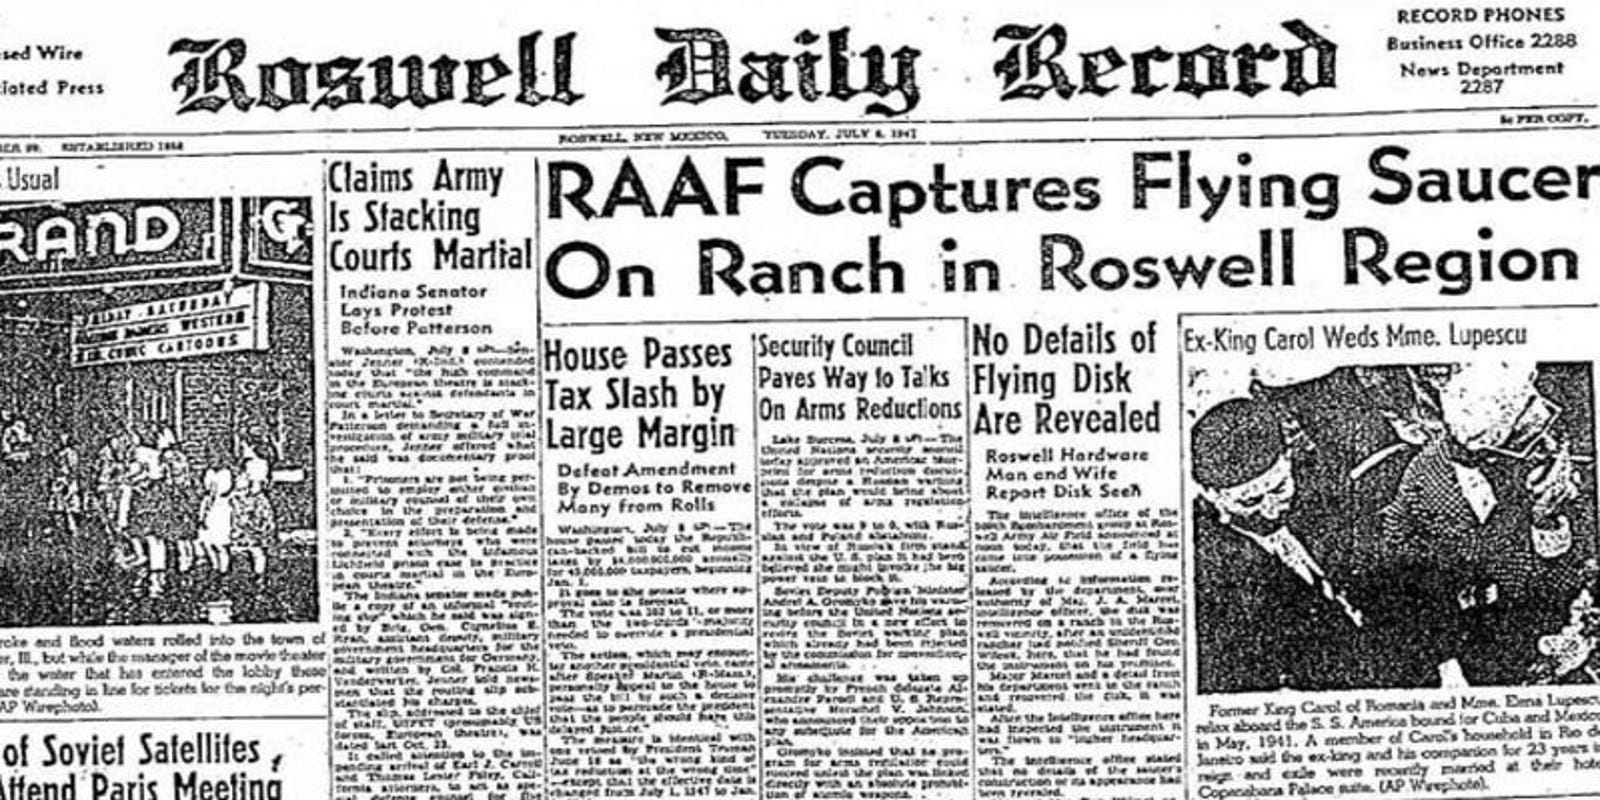 Today in History, July 8, 1947 Newspaper reports 'flying saucer' at